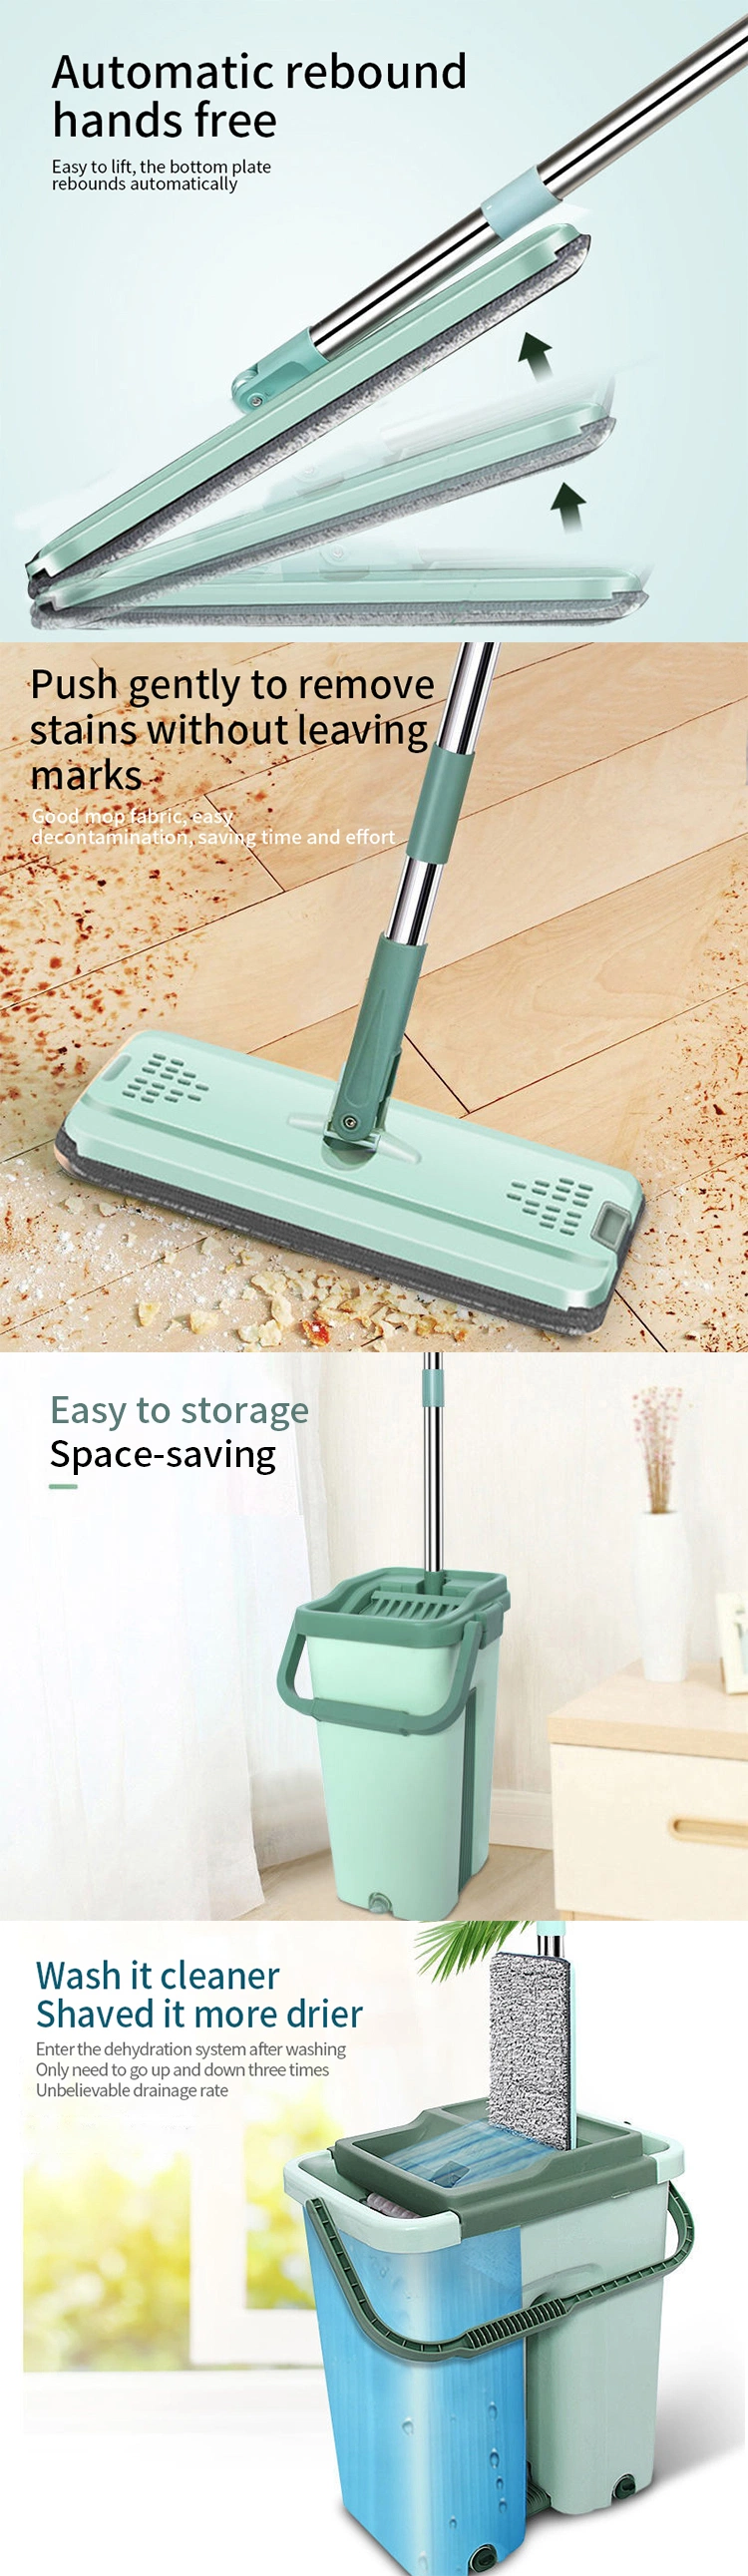 OEM Household Cleaning Tool 360 Degree Rotation Microfiber Material Flat Mop and Bucket